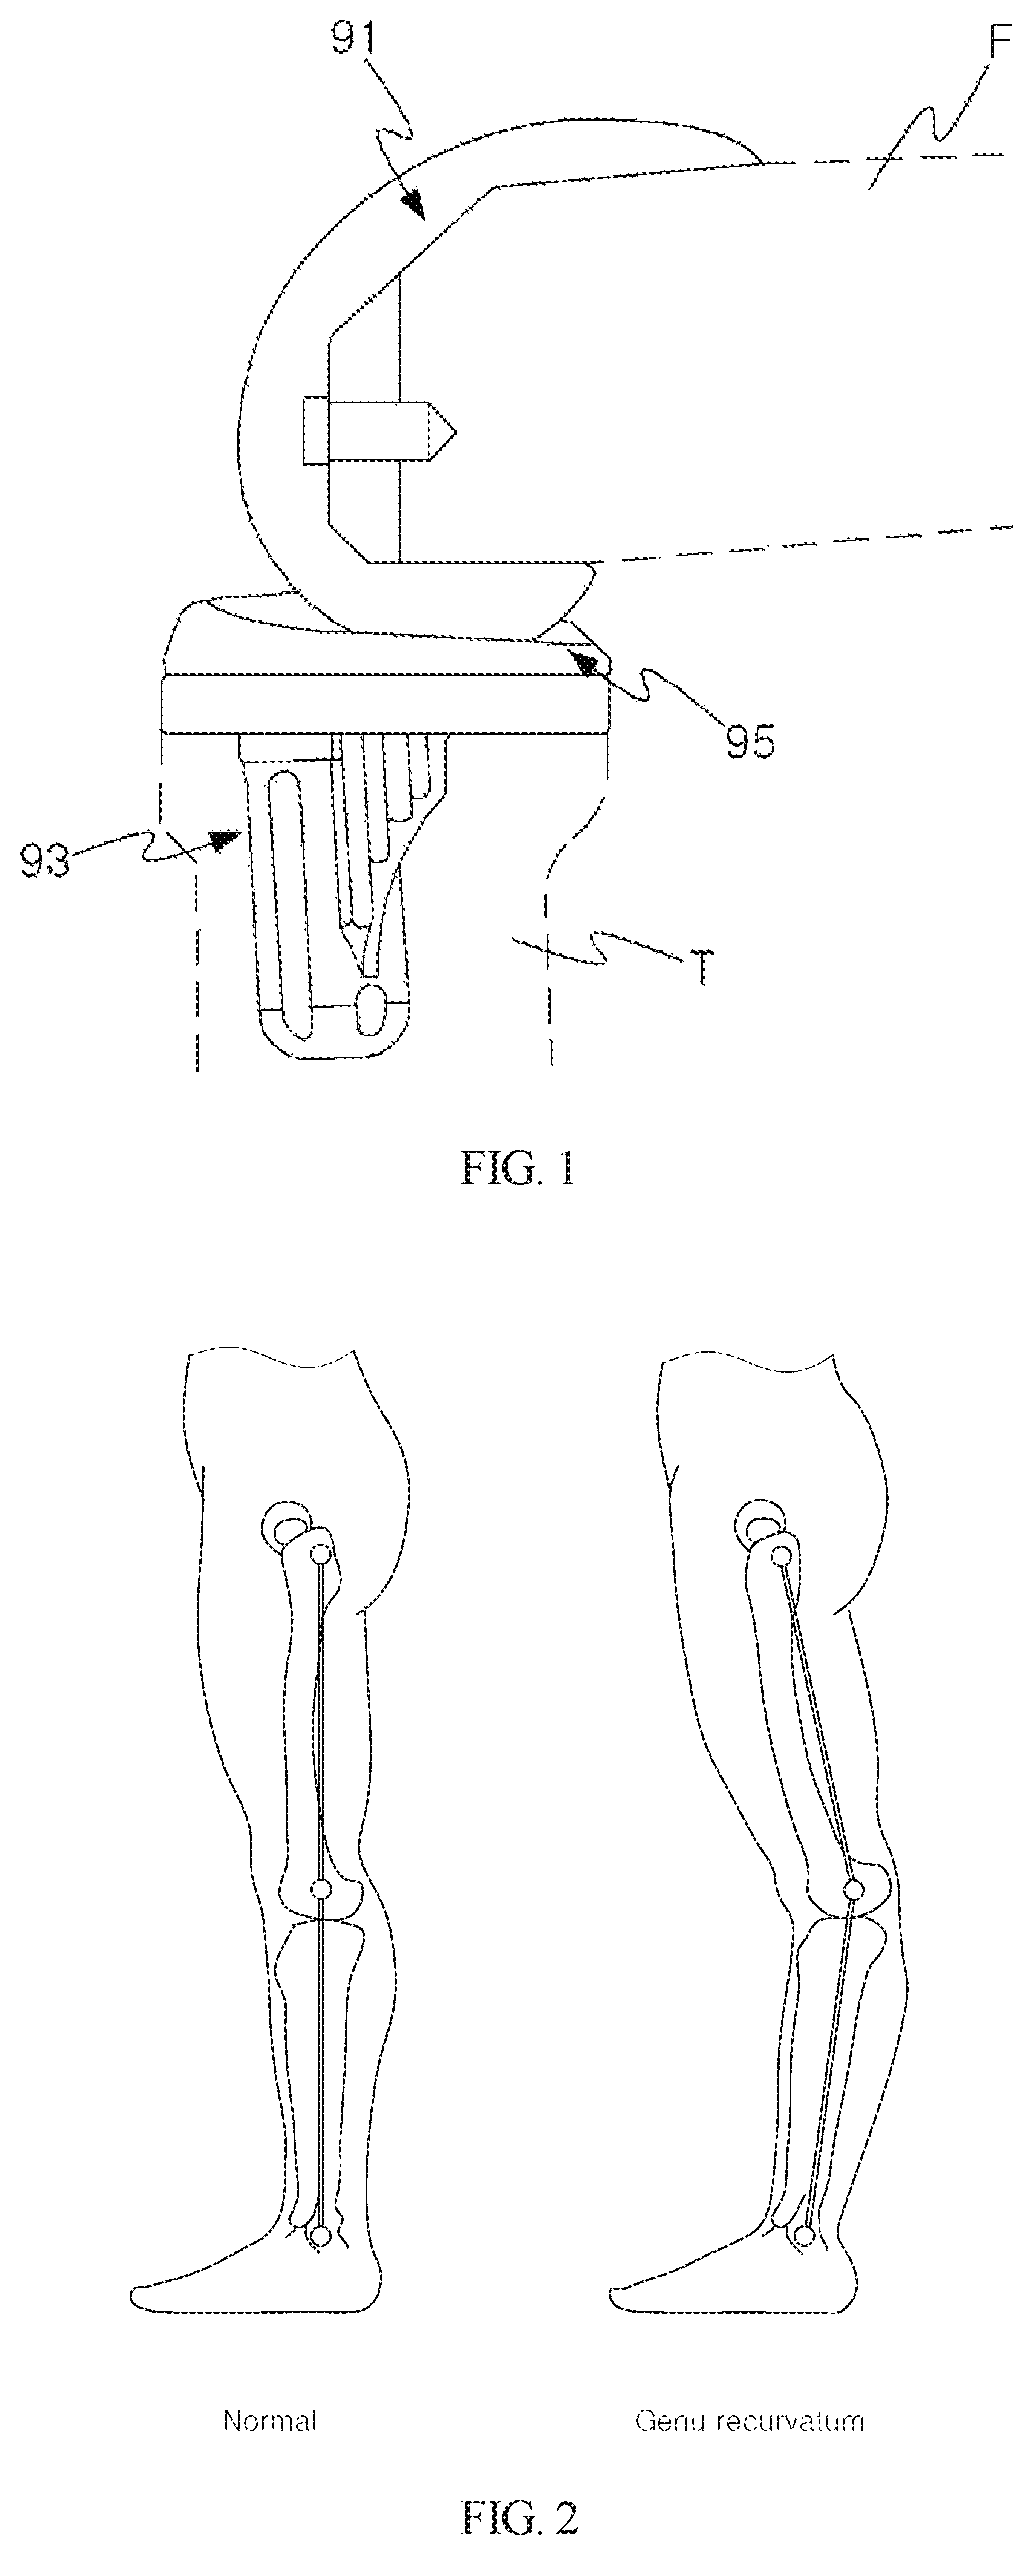 Knee joint implant preventing hyperextension